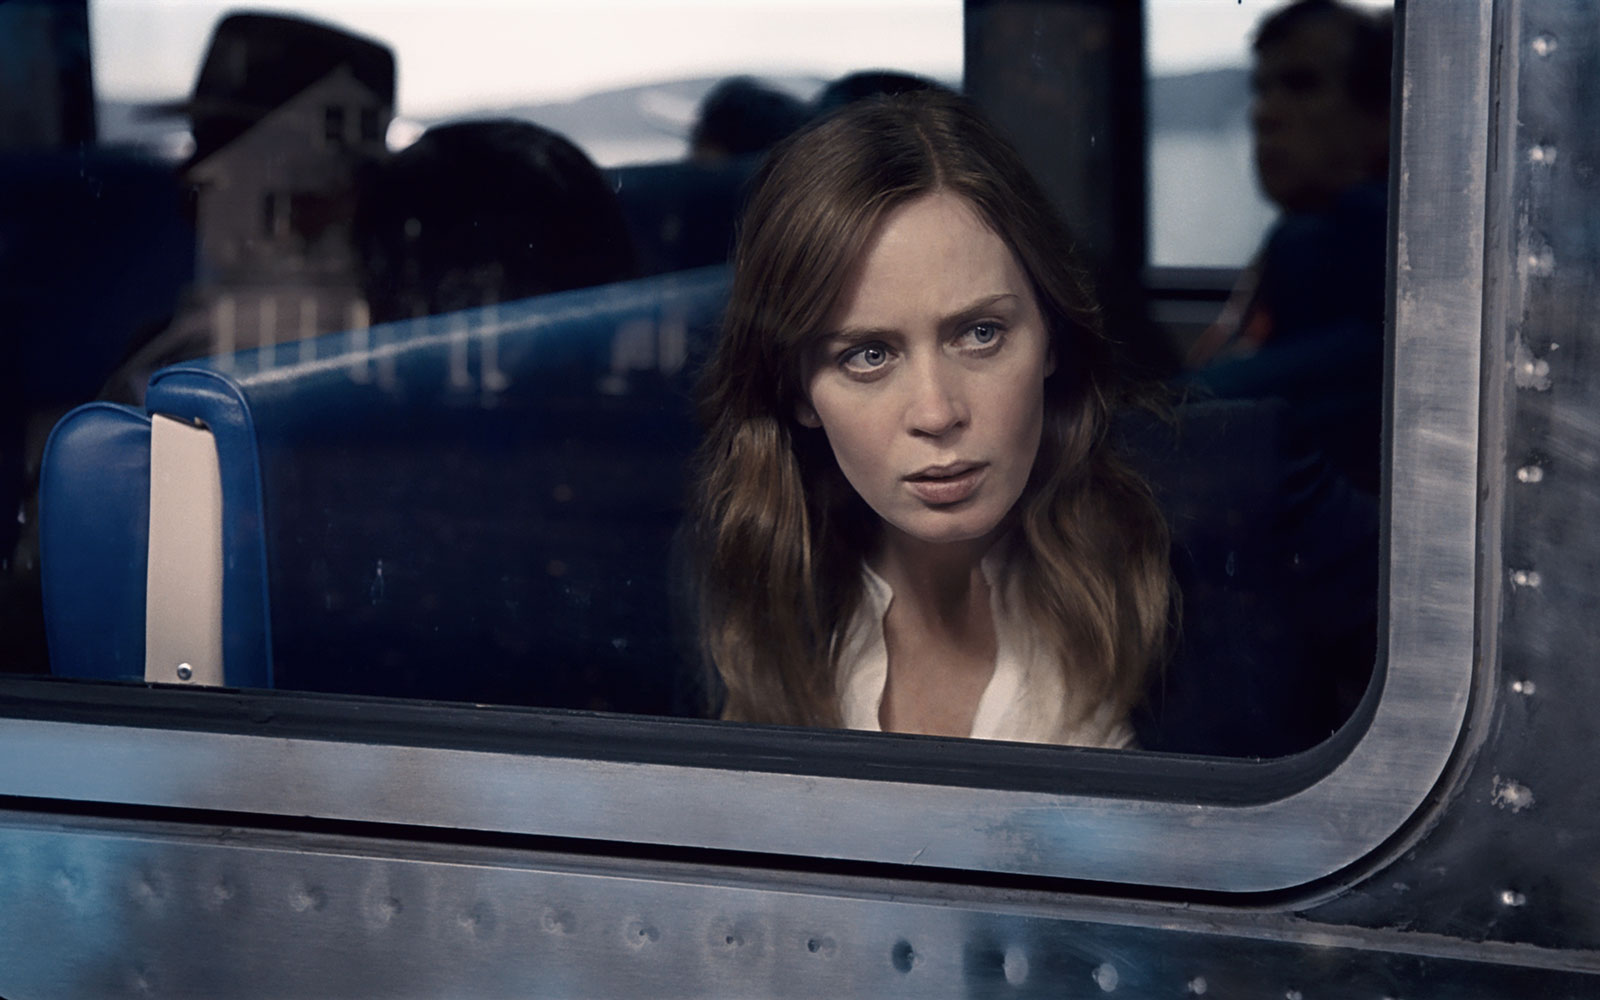 'the girl on the train' movie review by lucas mirabella